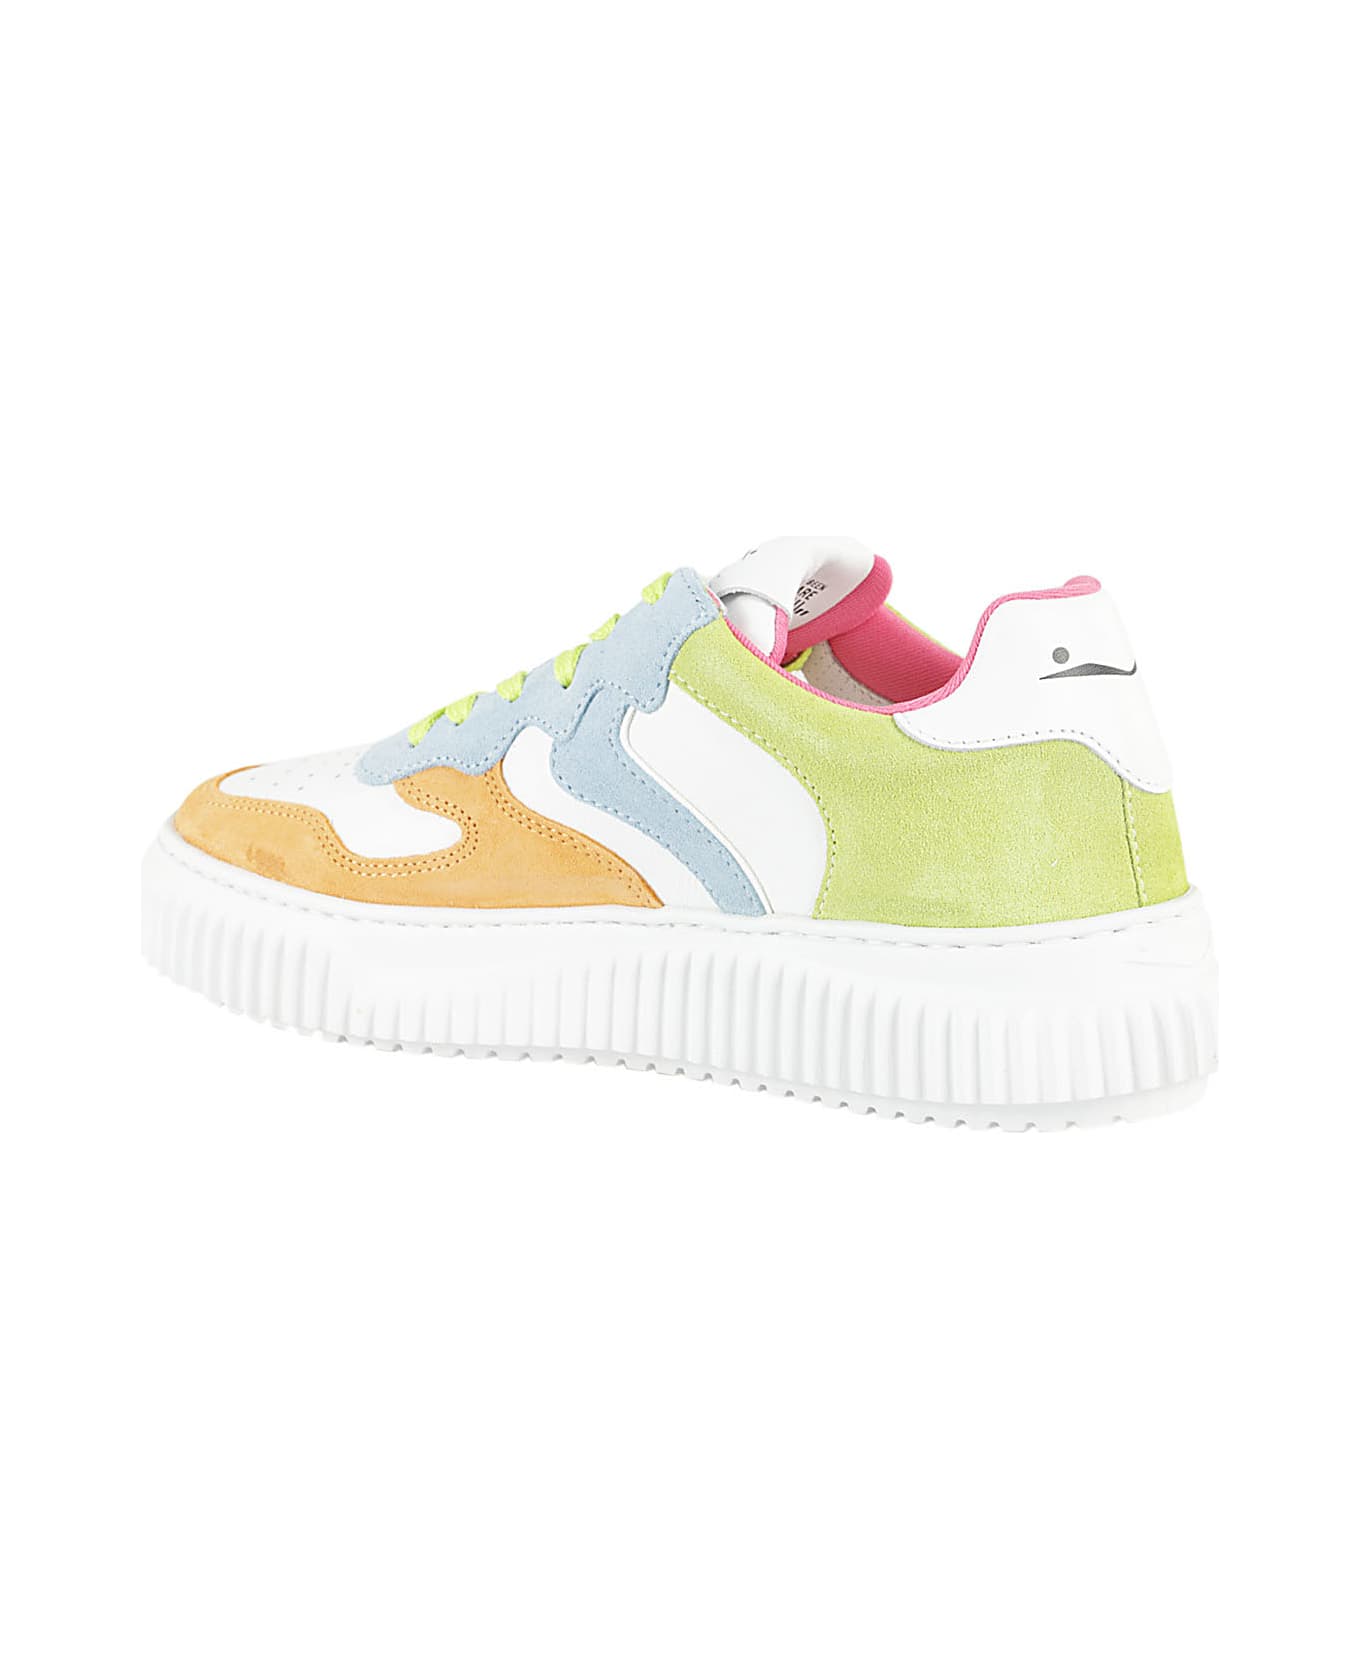 Voile Blanche Laura Suede - Peach Sky Blue Lime ウェッジシューズ